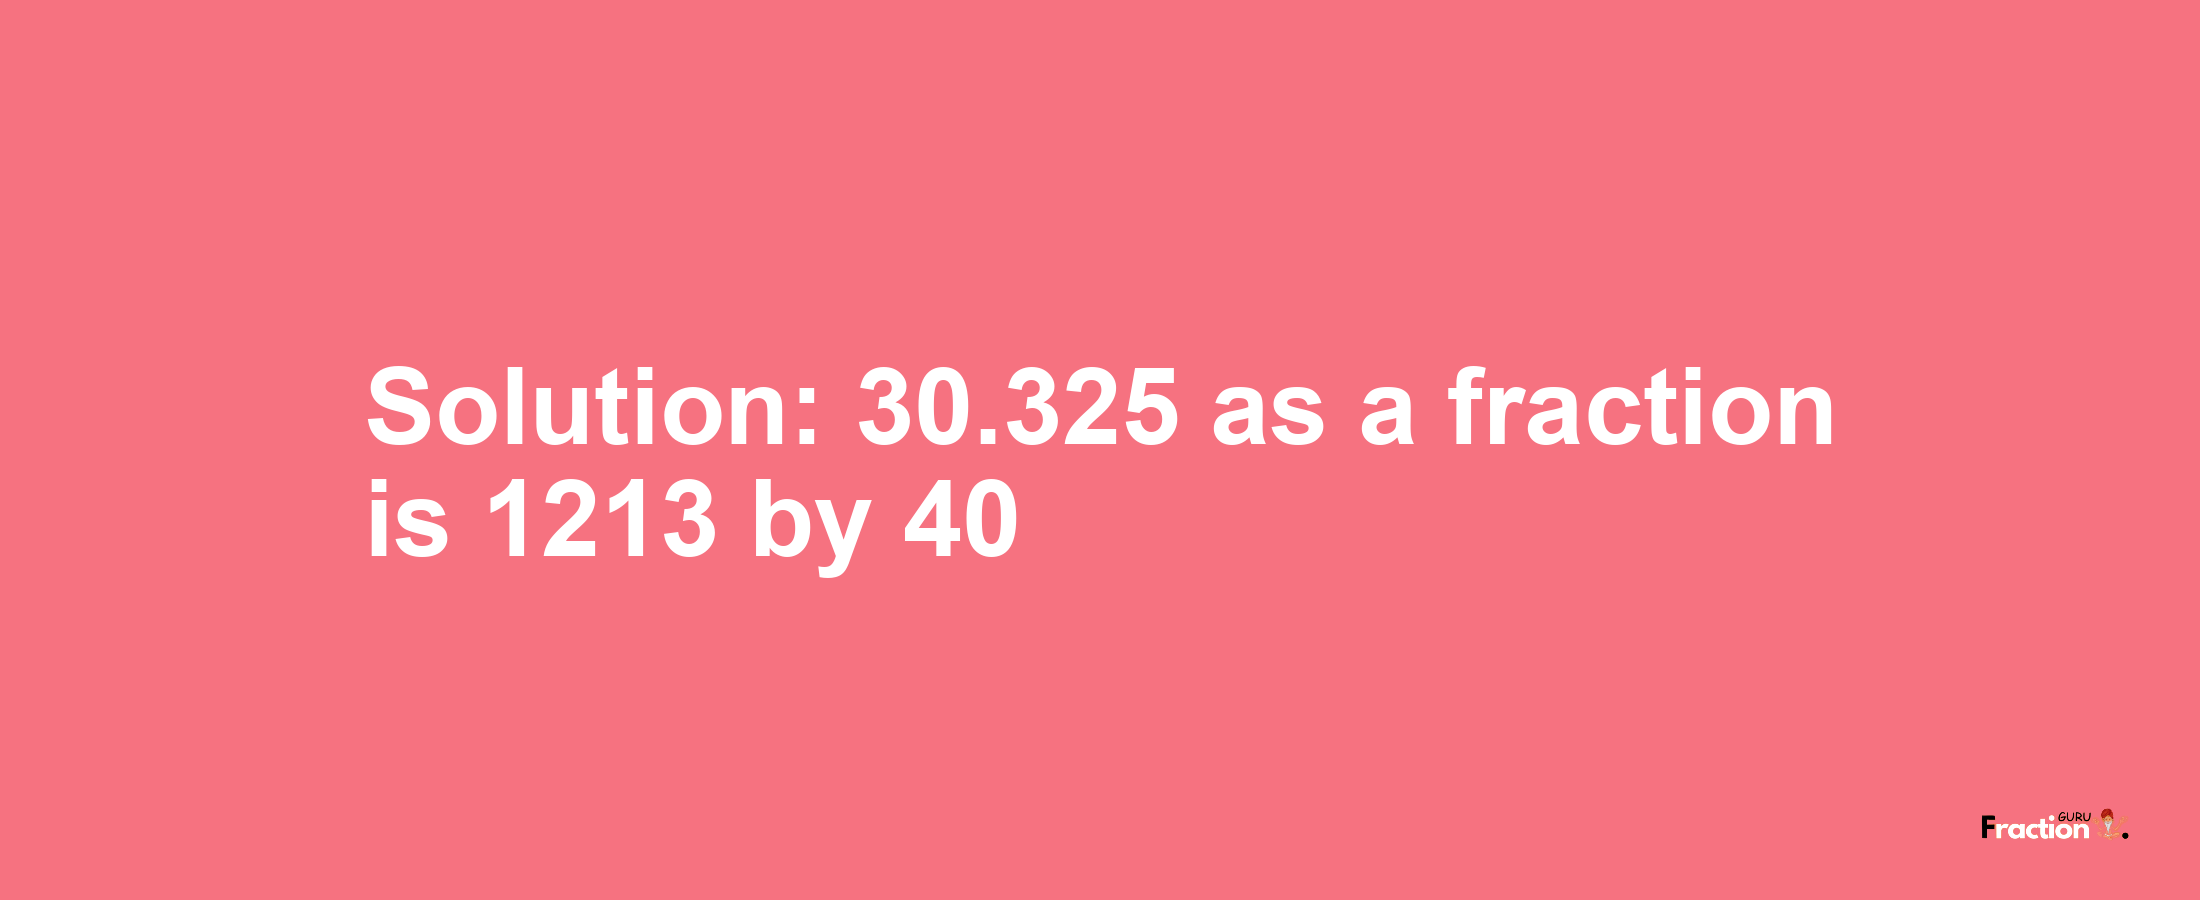 Solution:30.325 as a fraction is 1213/40